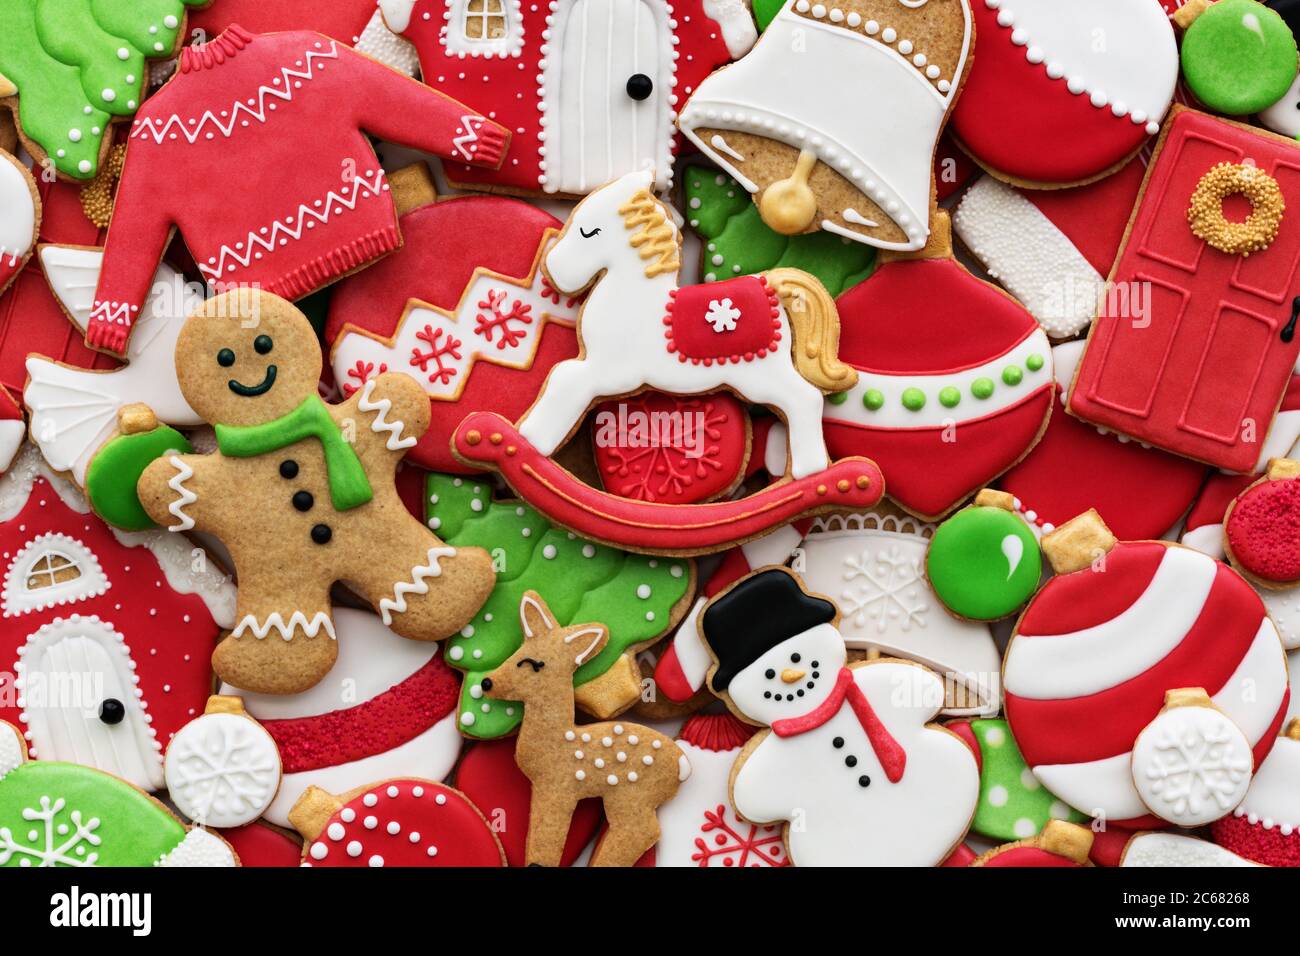 Assortment of decorated Christmas cookies Stock Photo